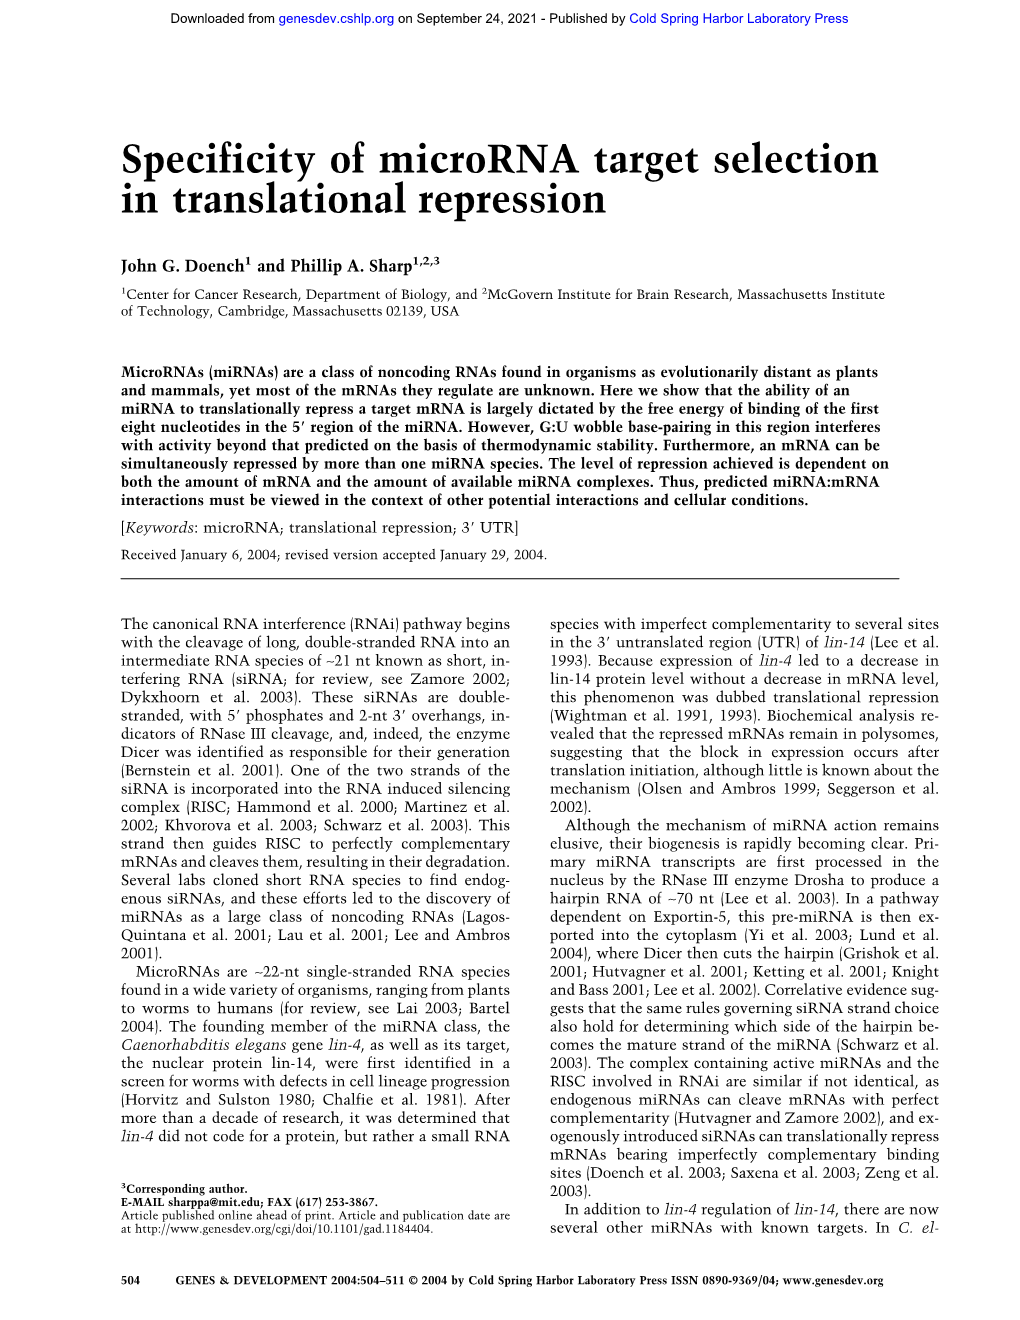 Specificity of Microrna Target Selection in Translational Repression